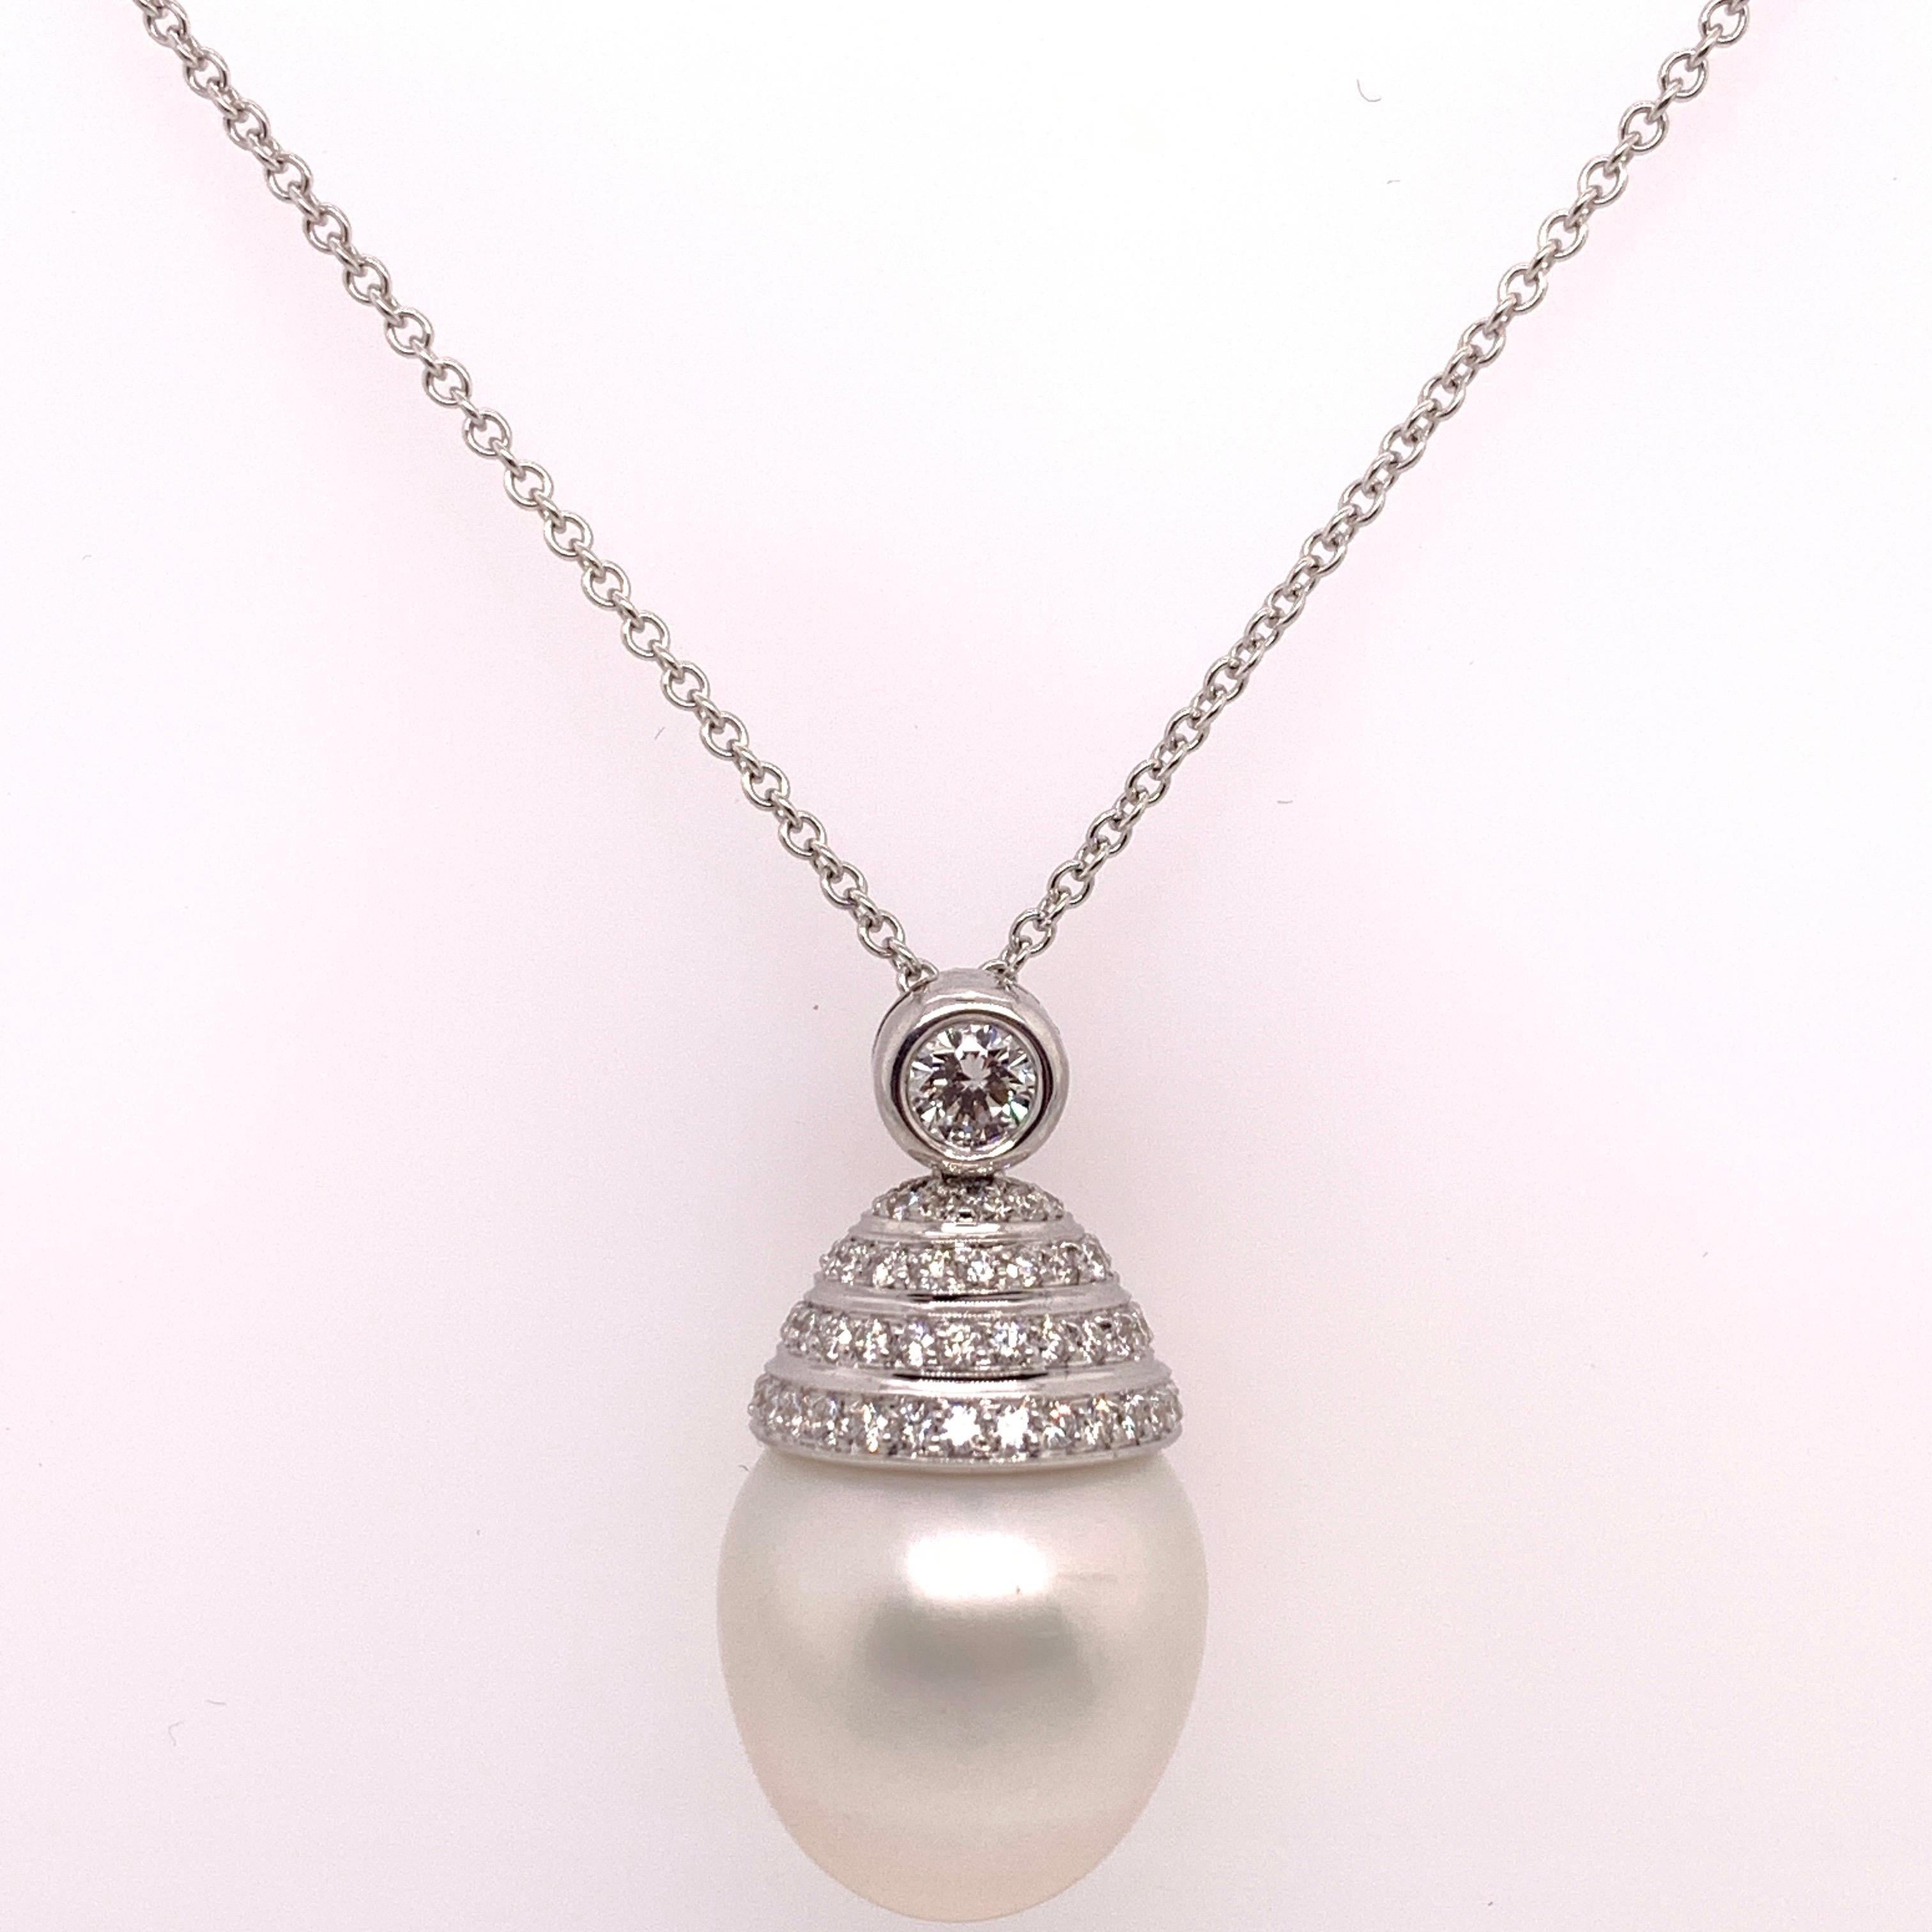 Modern South Sea Pearl Gold Pendant 1.60 Carat Natural Colorless RBC Diamond Necklace